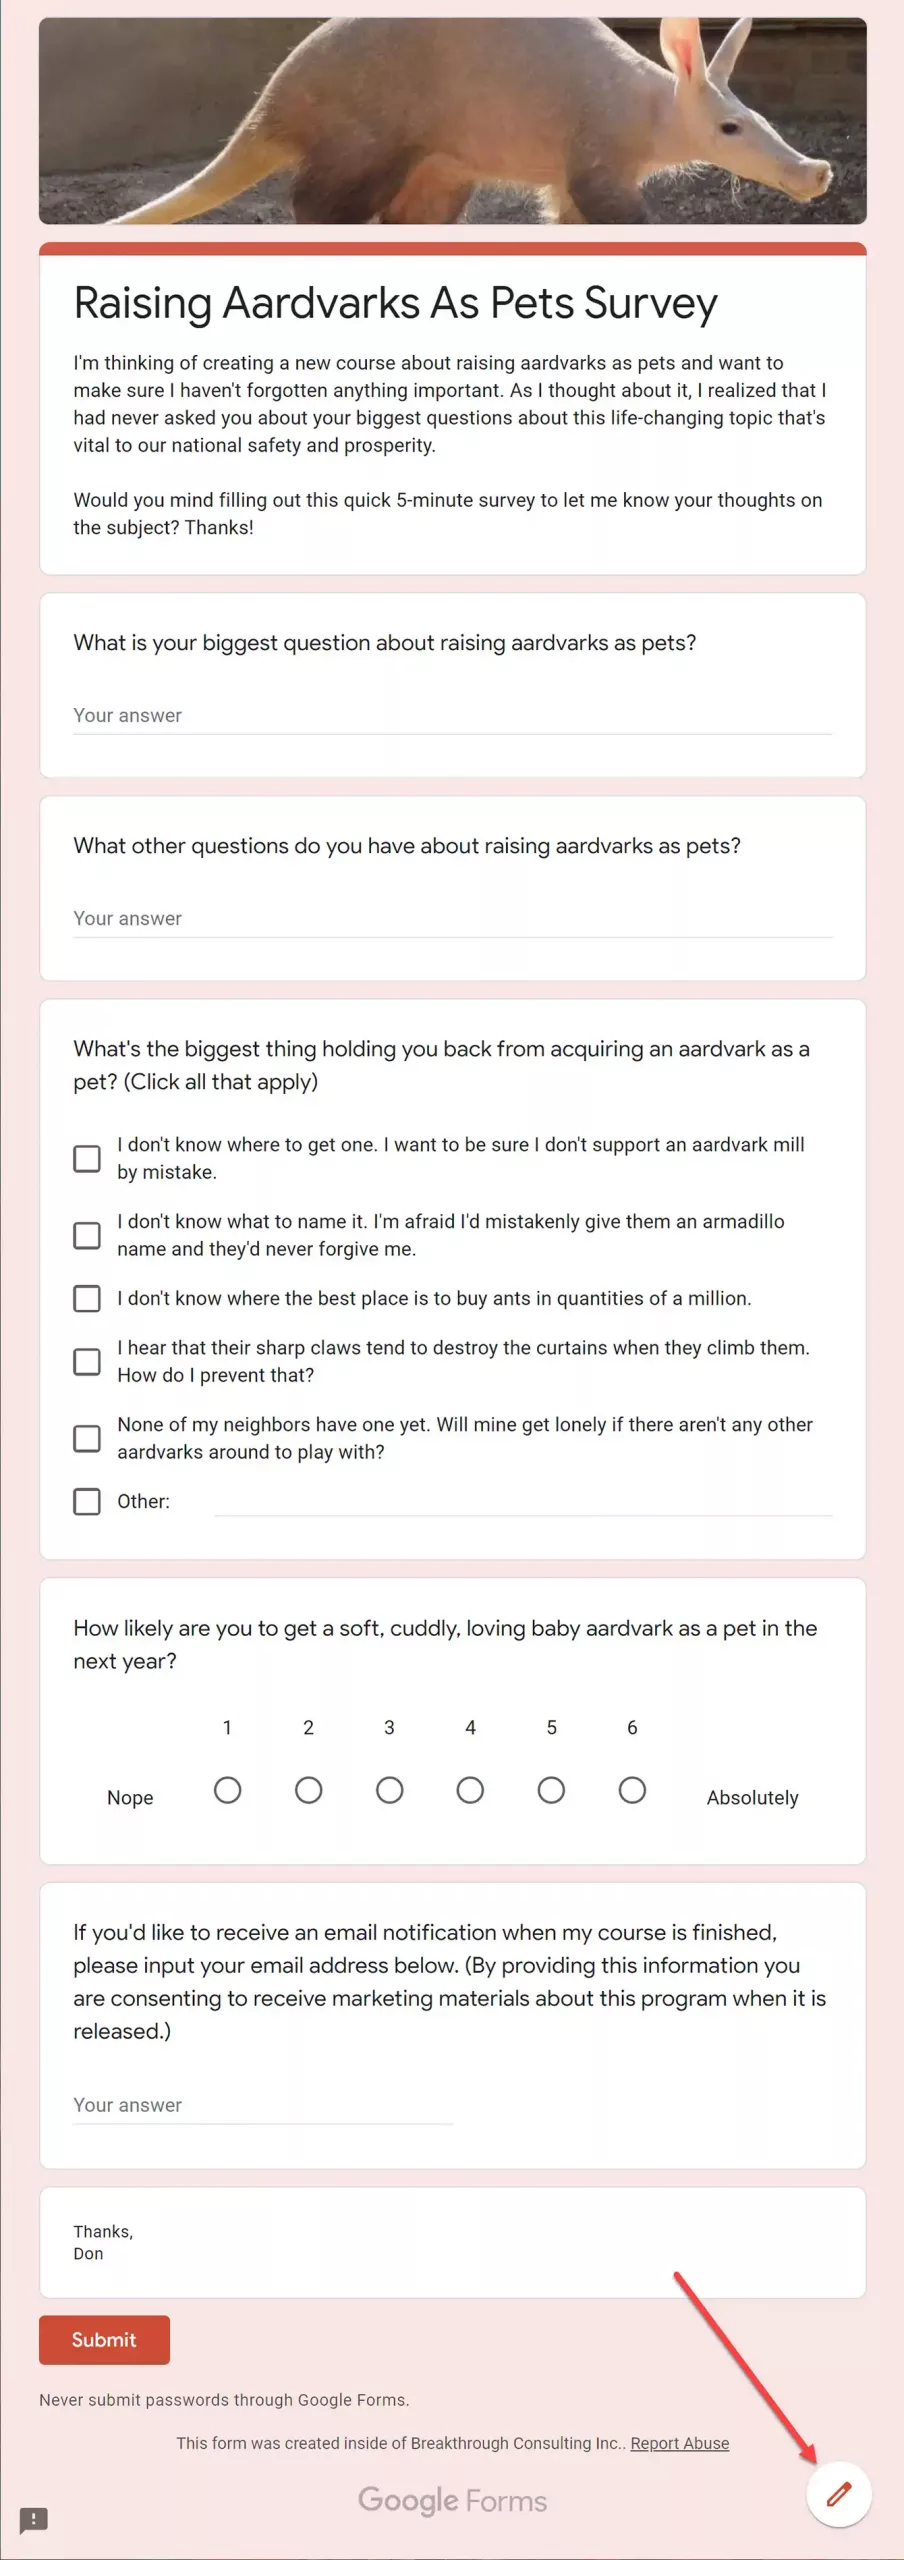 Previewed survey in Google Forms